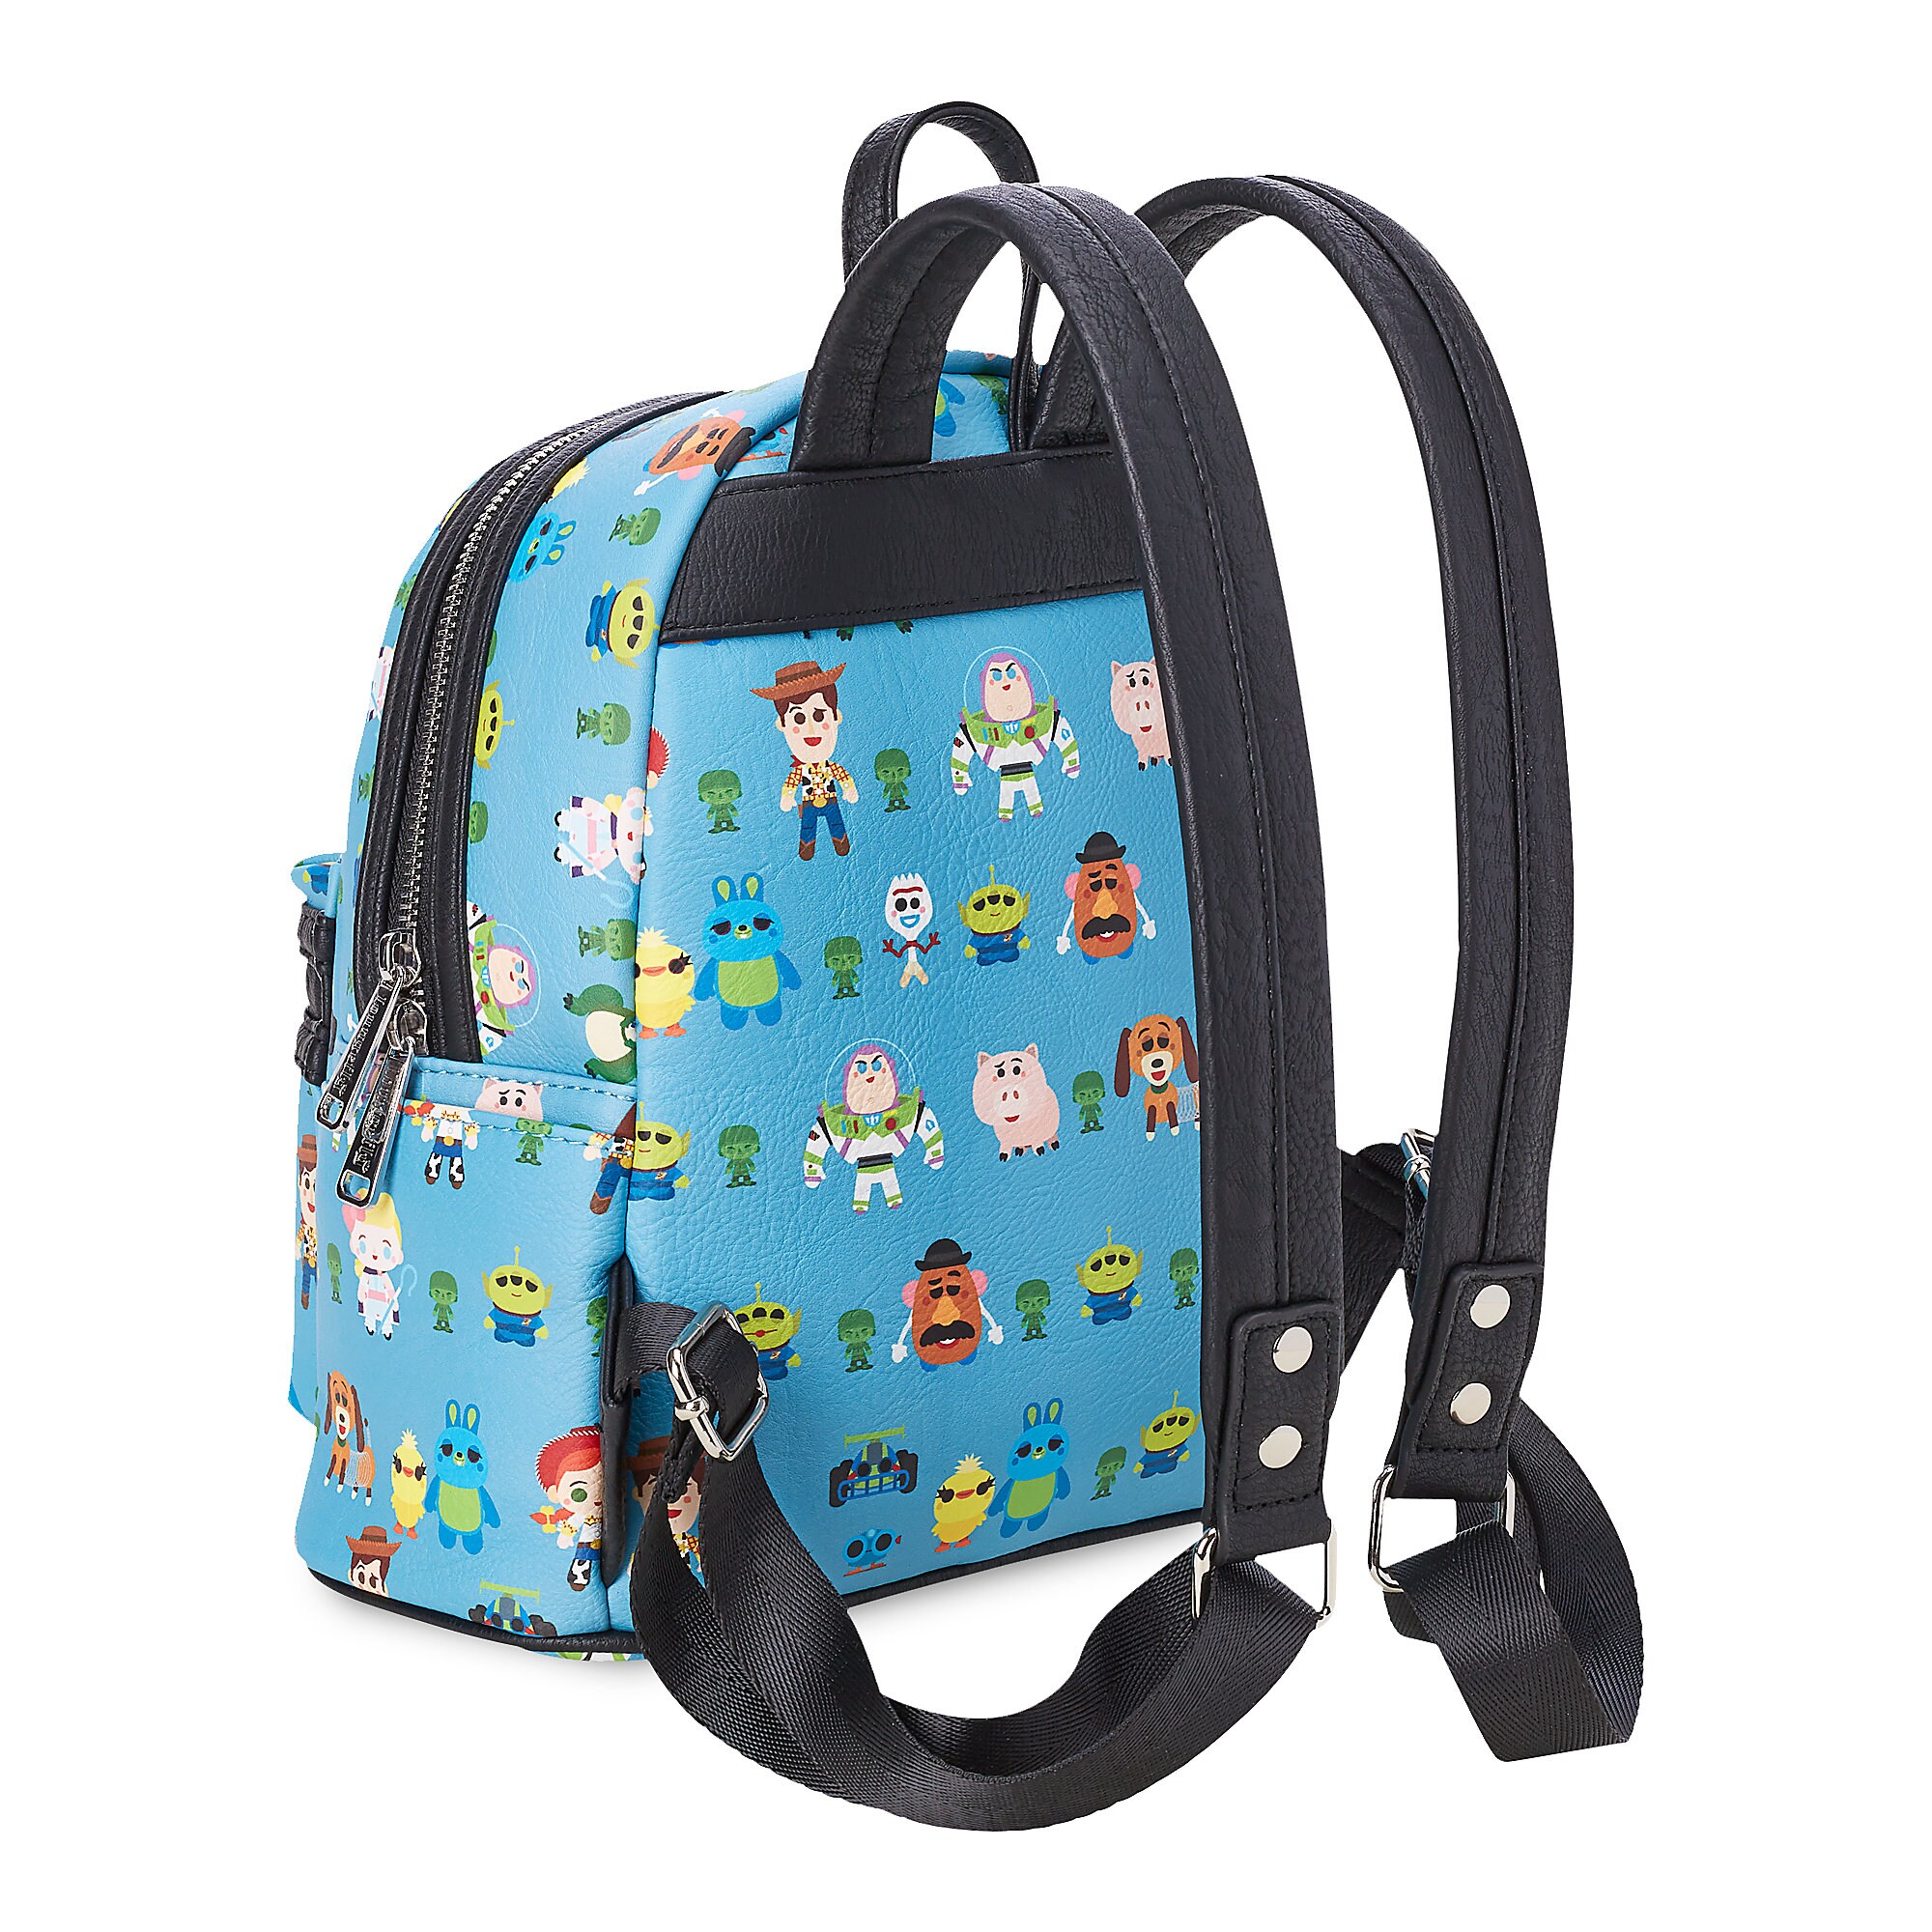 Toy Story 4 Mini Backpack by Loungefly